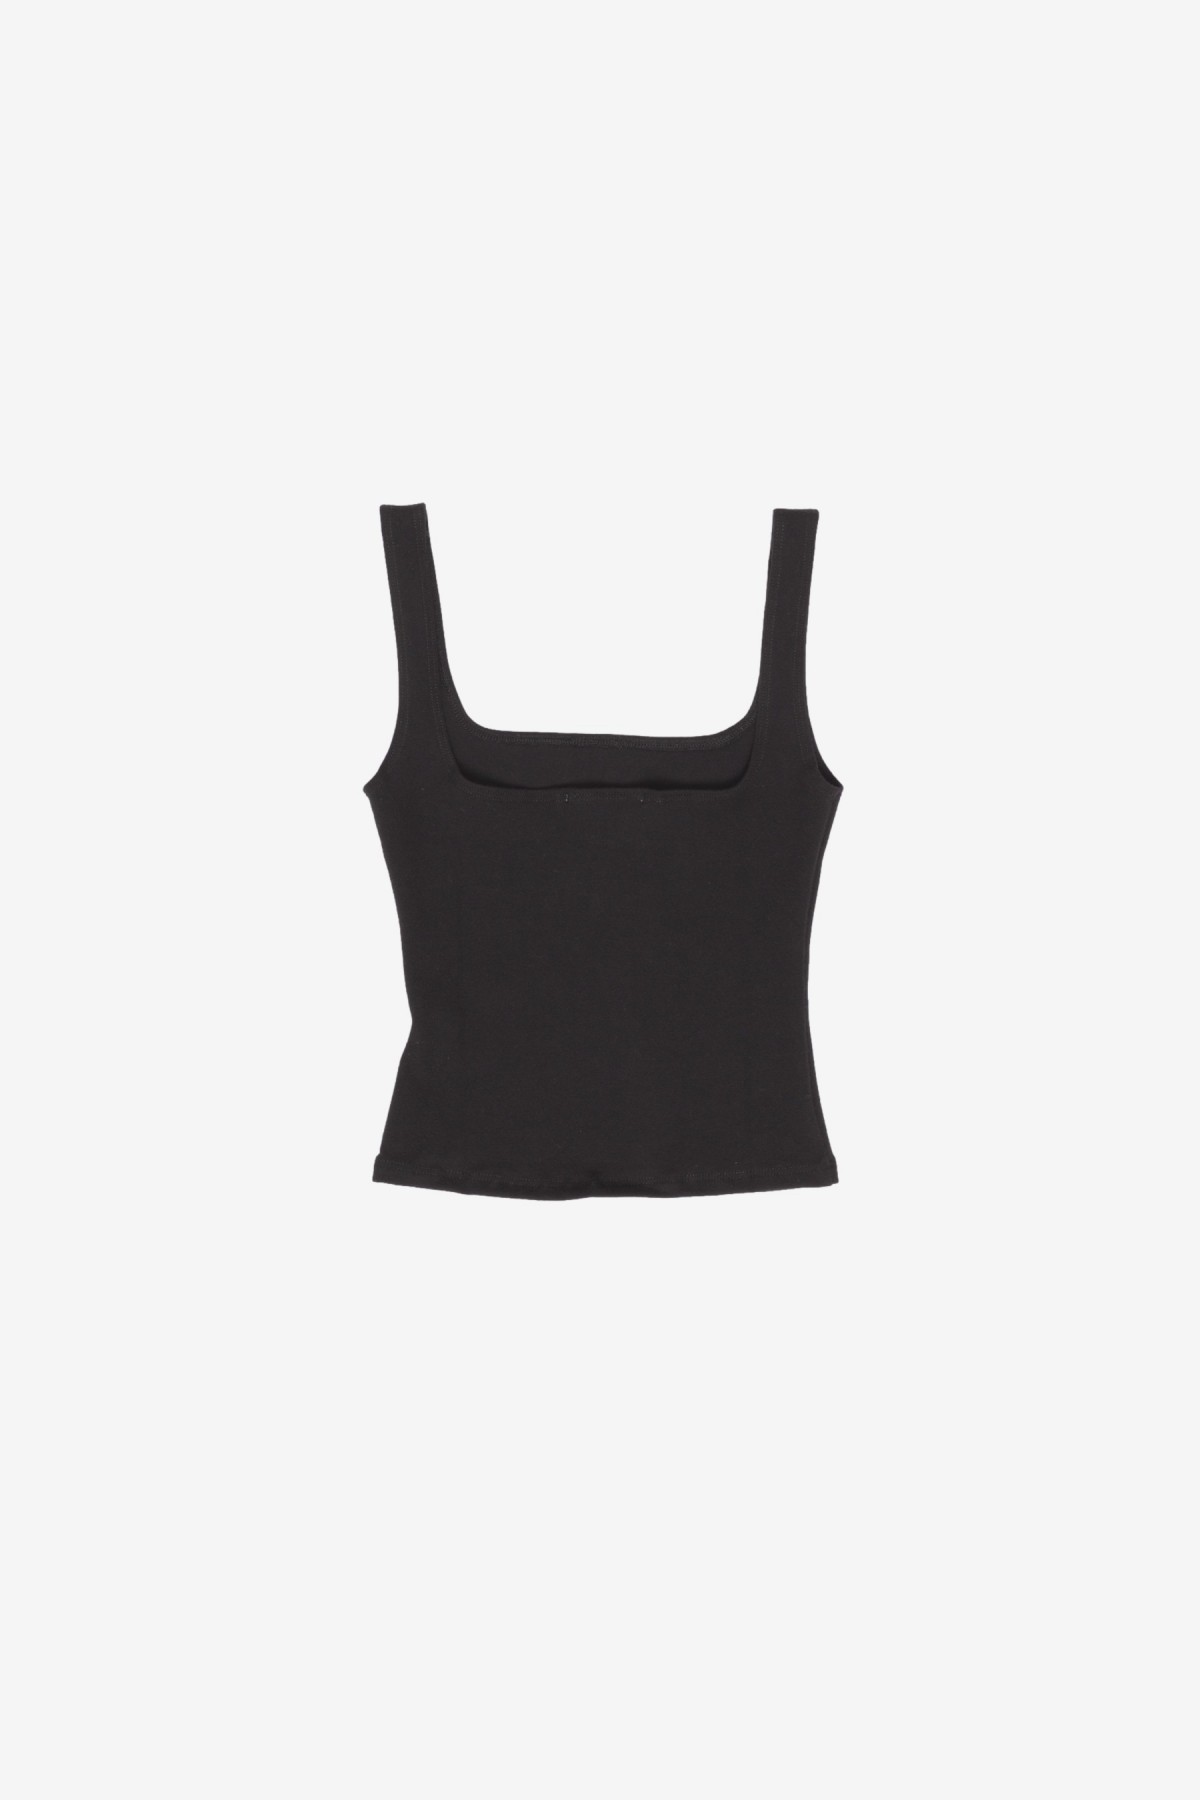 Gil Rodriguez Matisse Scooped Tank in Black